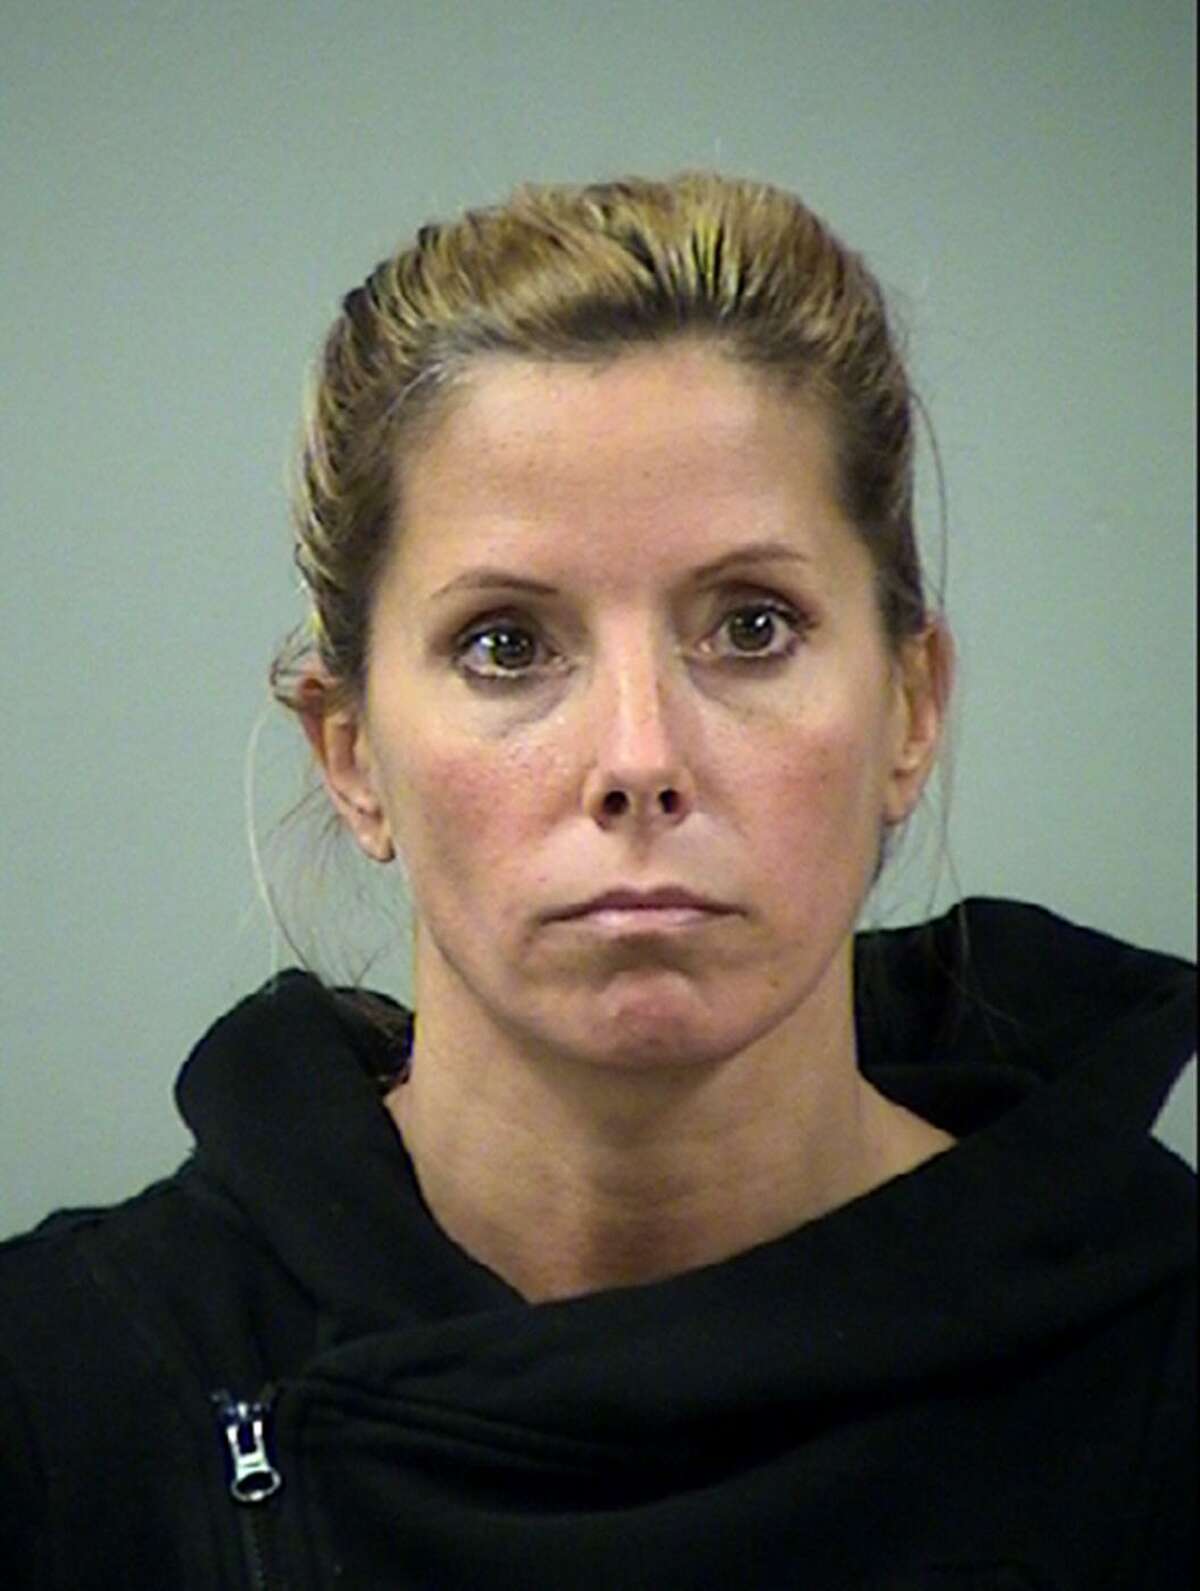 Holly Blakely, 45, admitted to paying more than $400,000 in kickbacks and bribes to health care providers prescribing compound medications for pain to people who did not need them. Two pharmacies paid her more than $1 million.